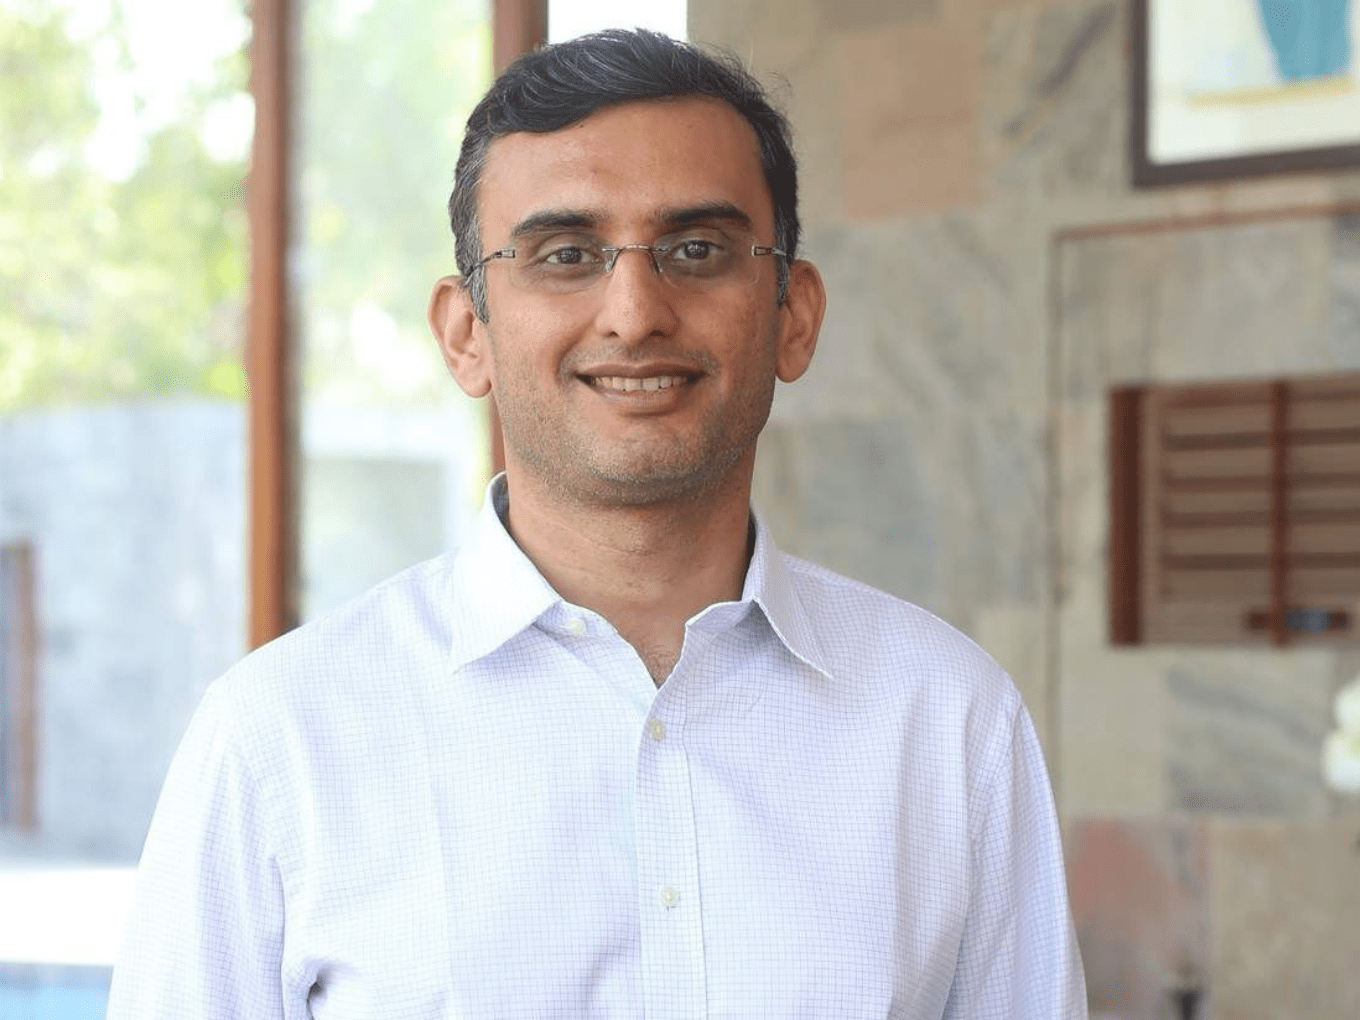 Consumer lending fintech startup Credit Fair has raised $15M as part of its seed round led by seasoned Angels Investors Anand Ladsariya and Alok Agarwal